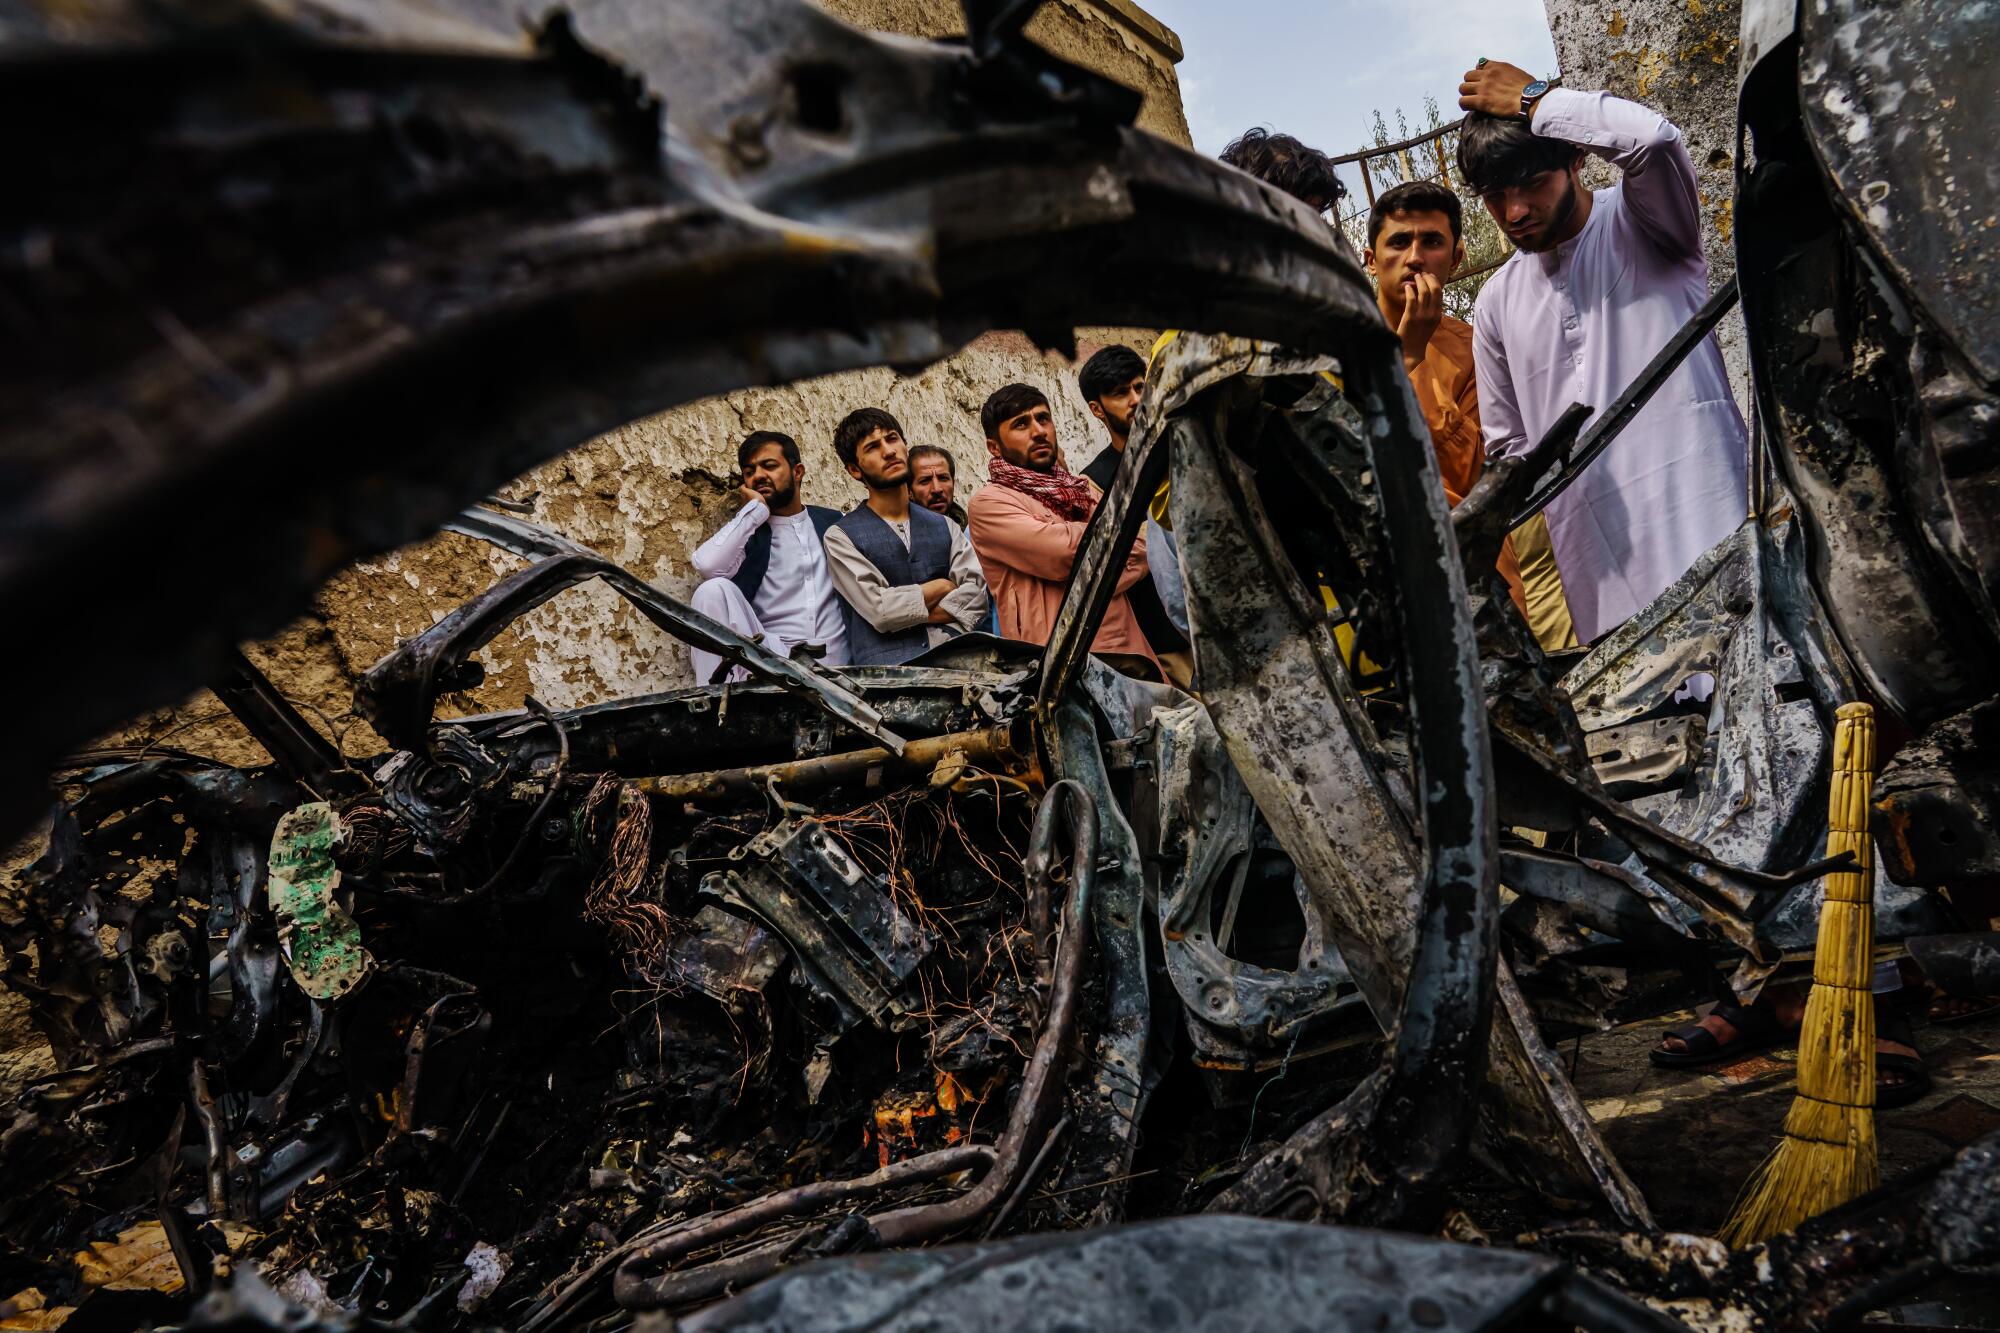 People gather near the burned remains of a vehicle 